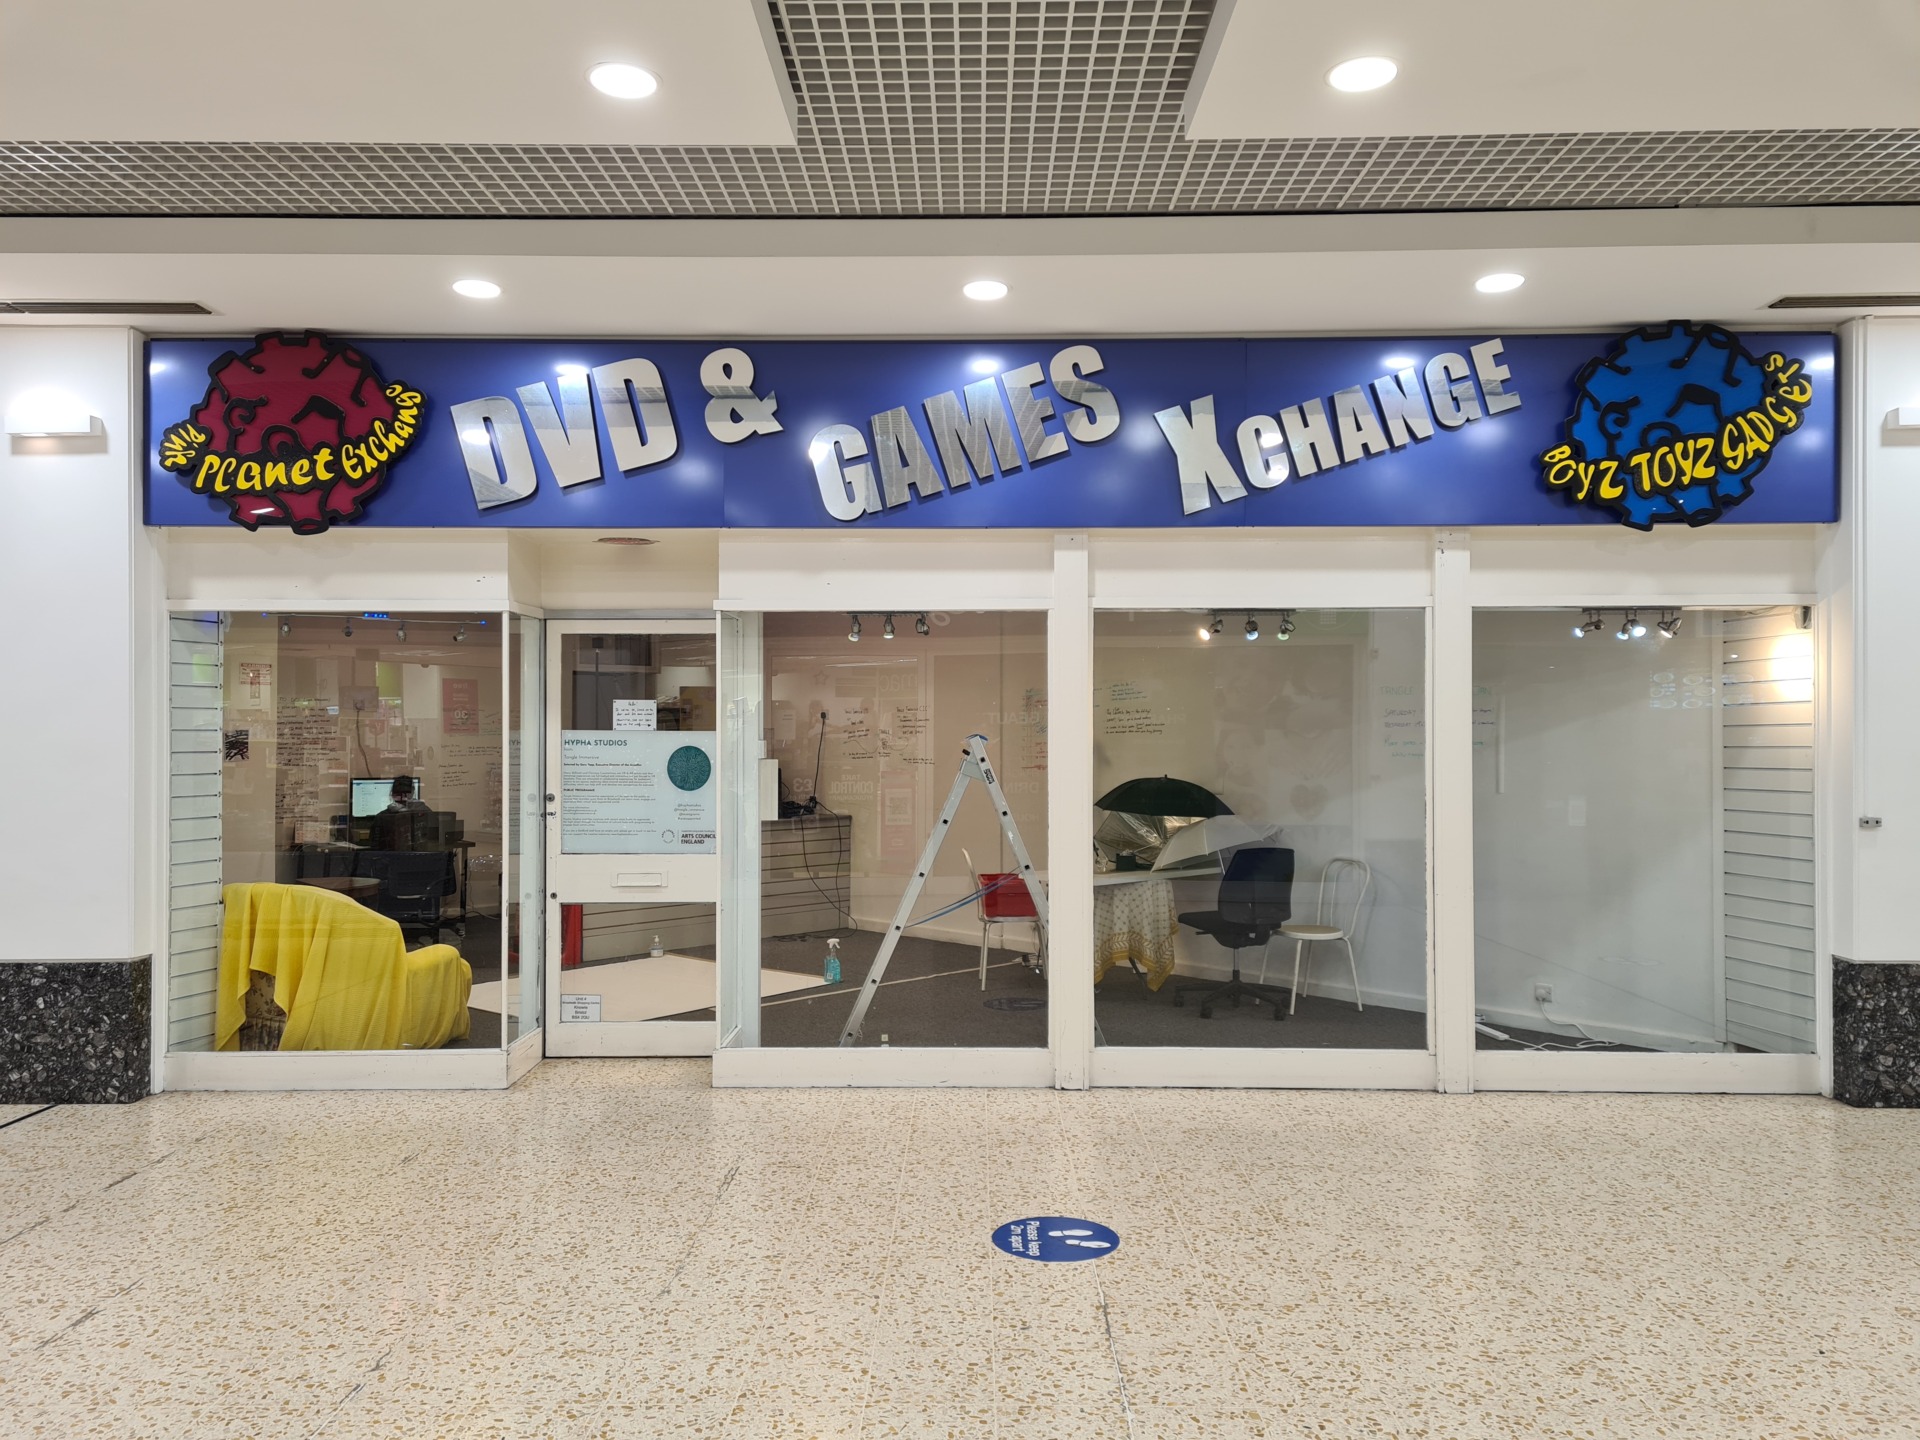 Shop front image with sign that says DVD & Games Exchange